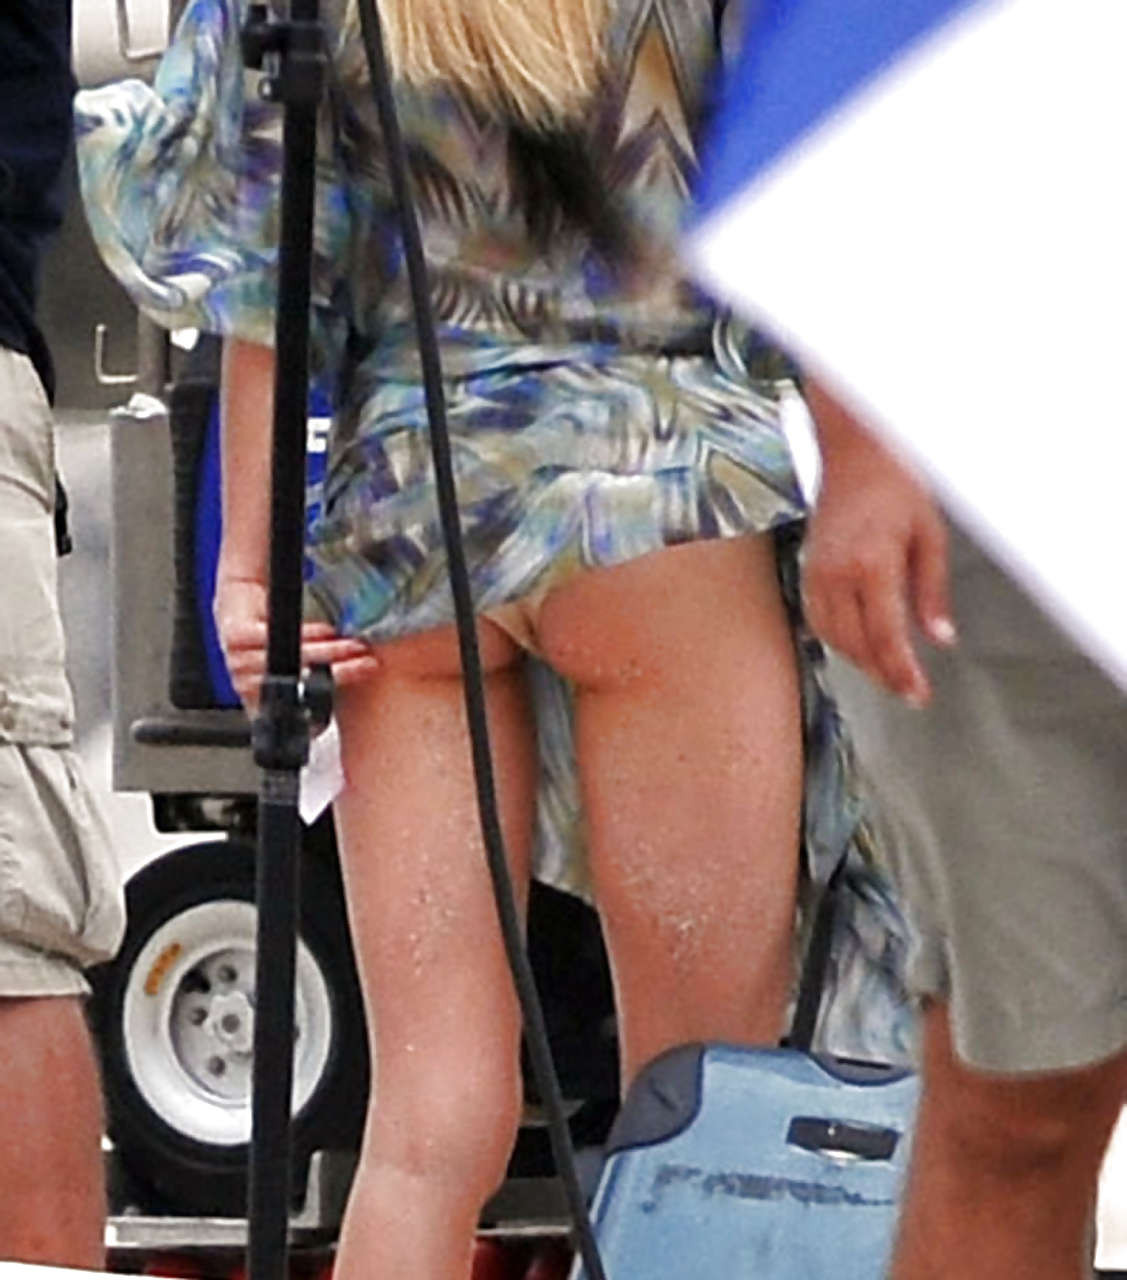 Rachael Taylor showing her ass upskirt and in see thru dress paparazzi pictures #75288483